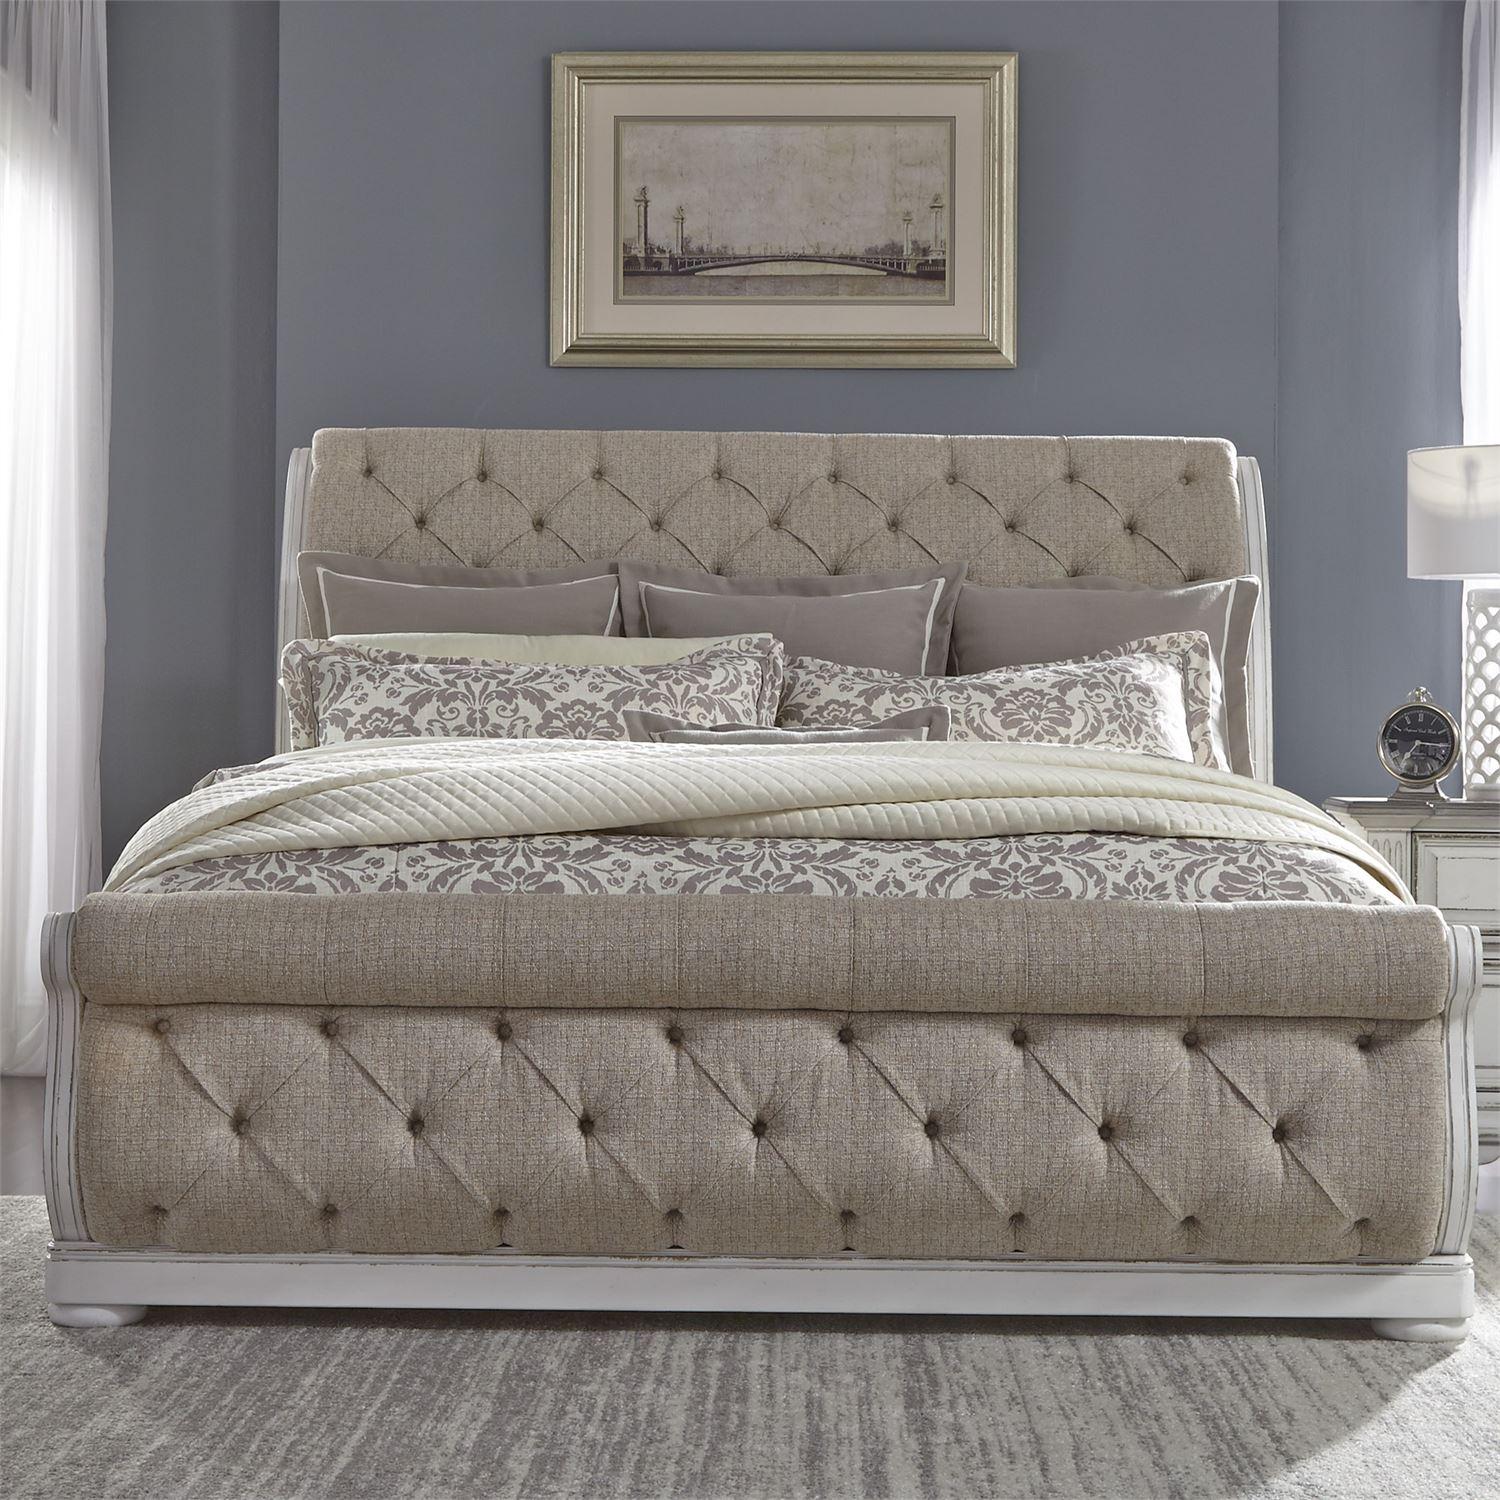 Traditional Sleigh Bed Abbey Park 520-BR-KUSL 520-BR-KUSL in White 